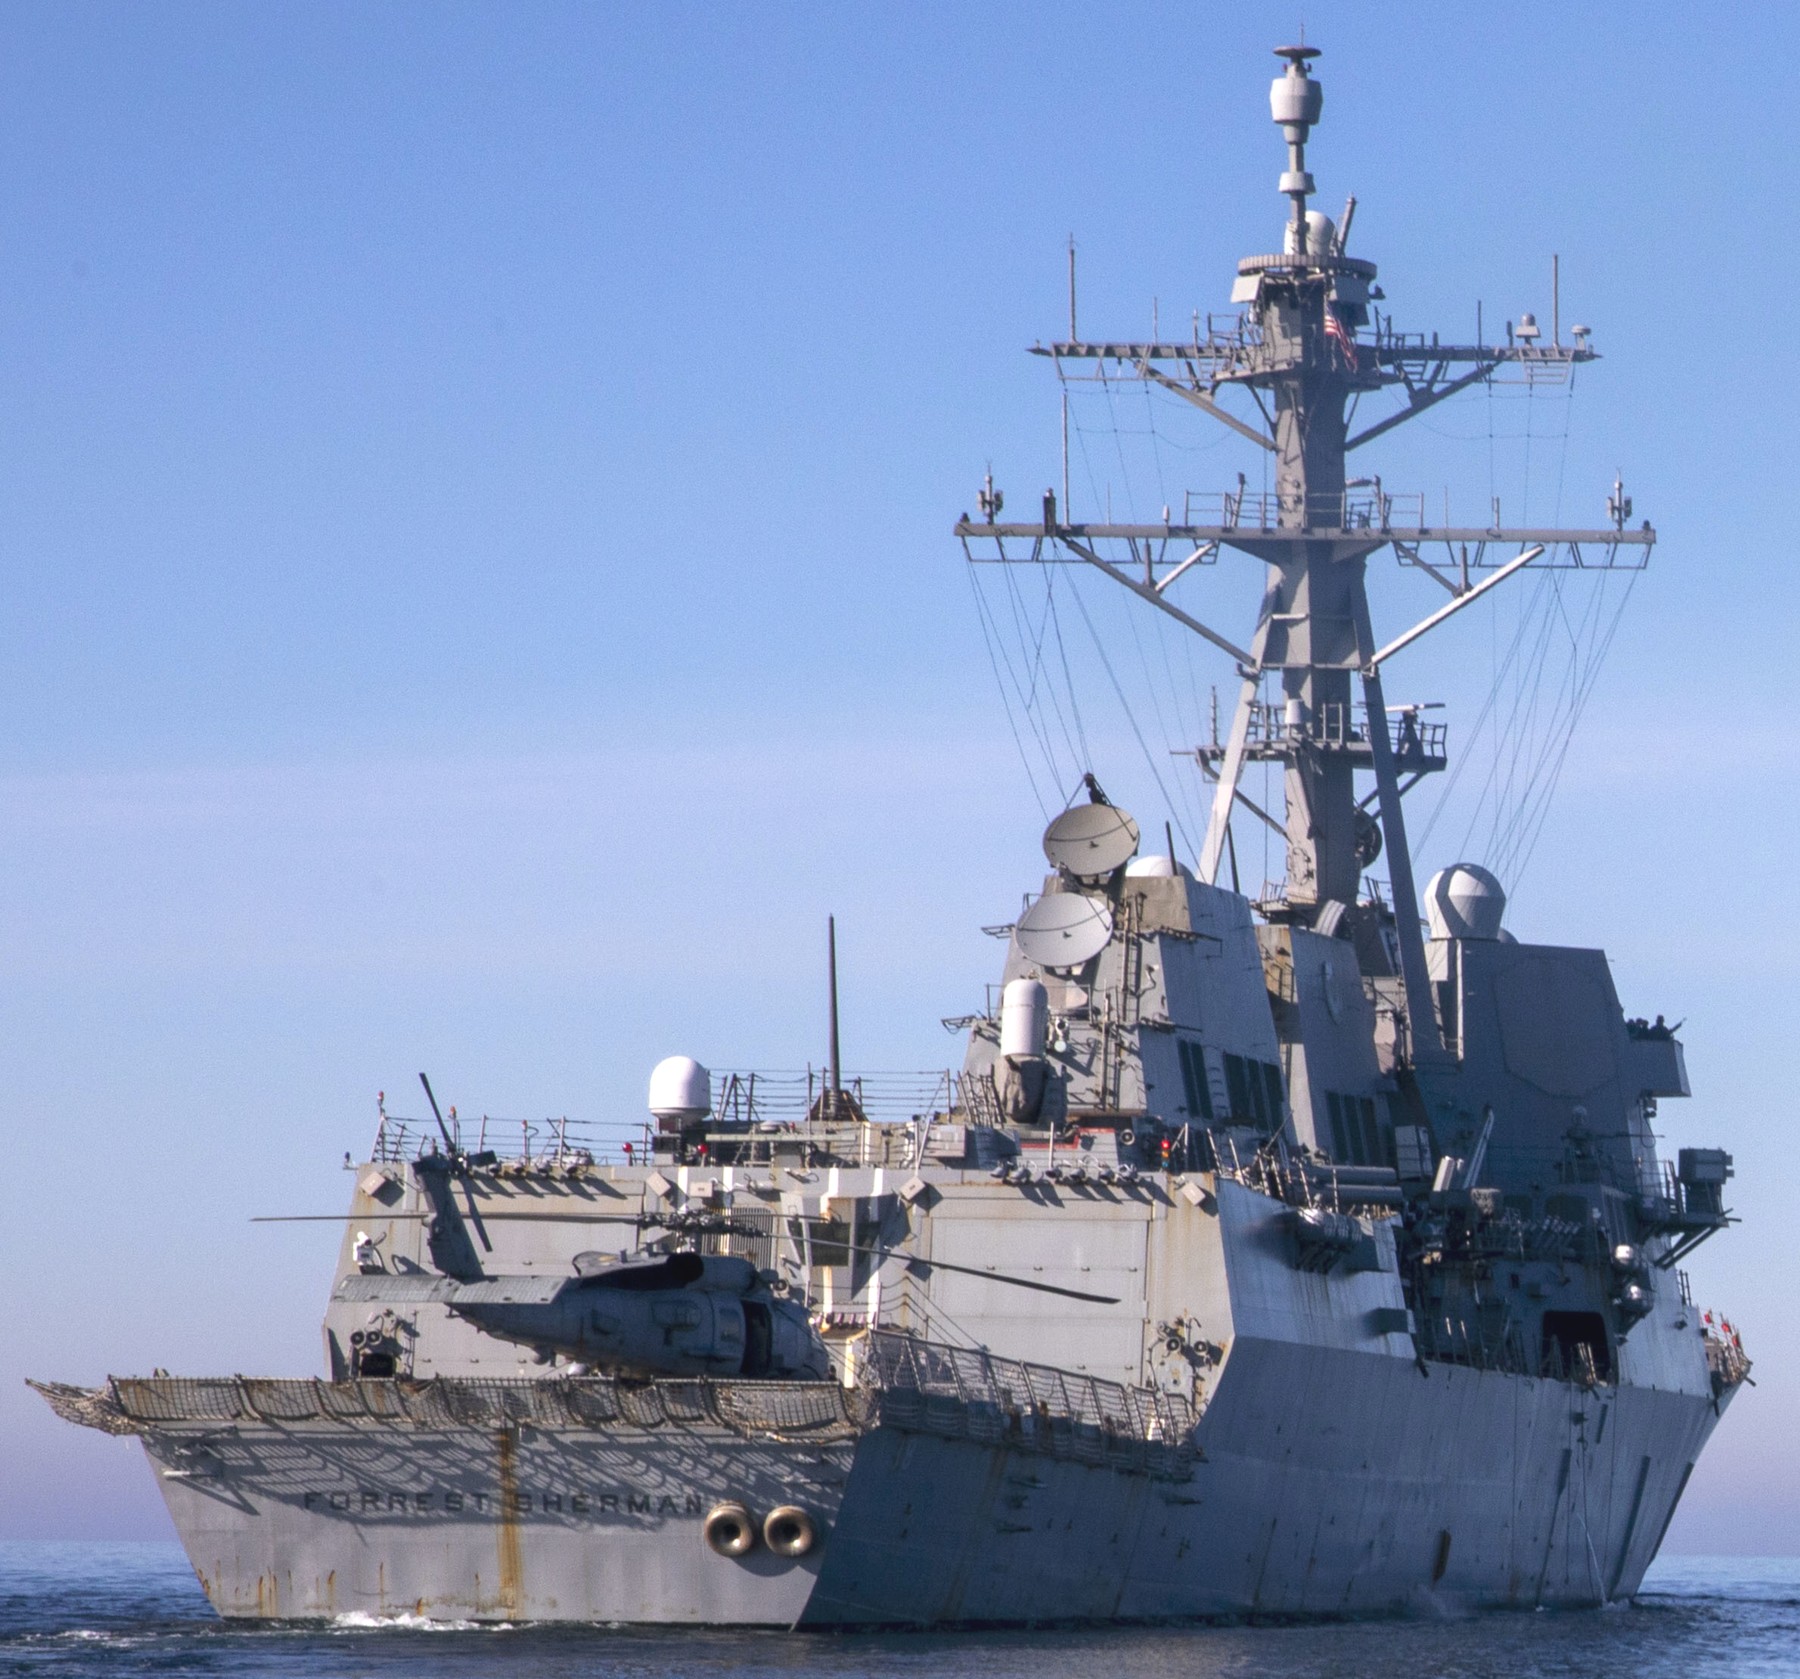 ddg-98 uss forrest sherman arleigh burke class guided missile destroyer aegis us navy baltic sea baltops 82